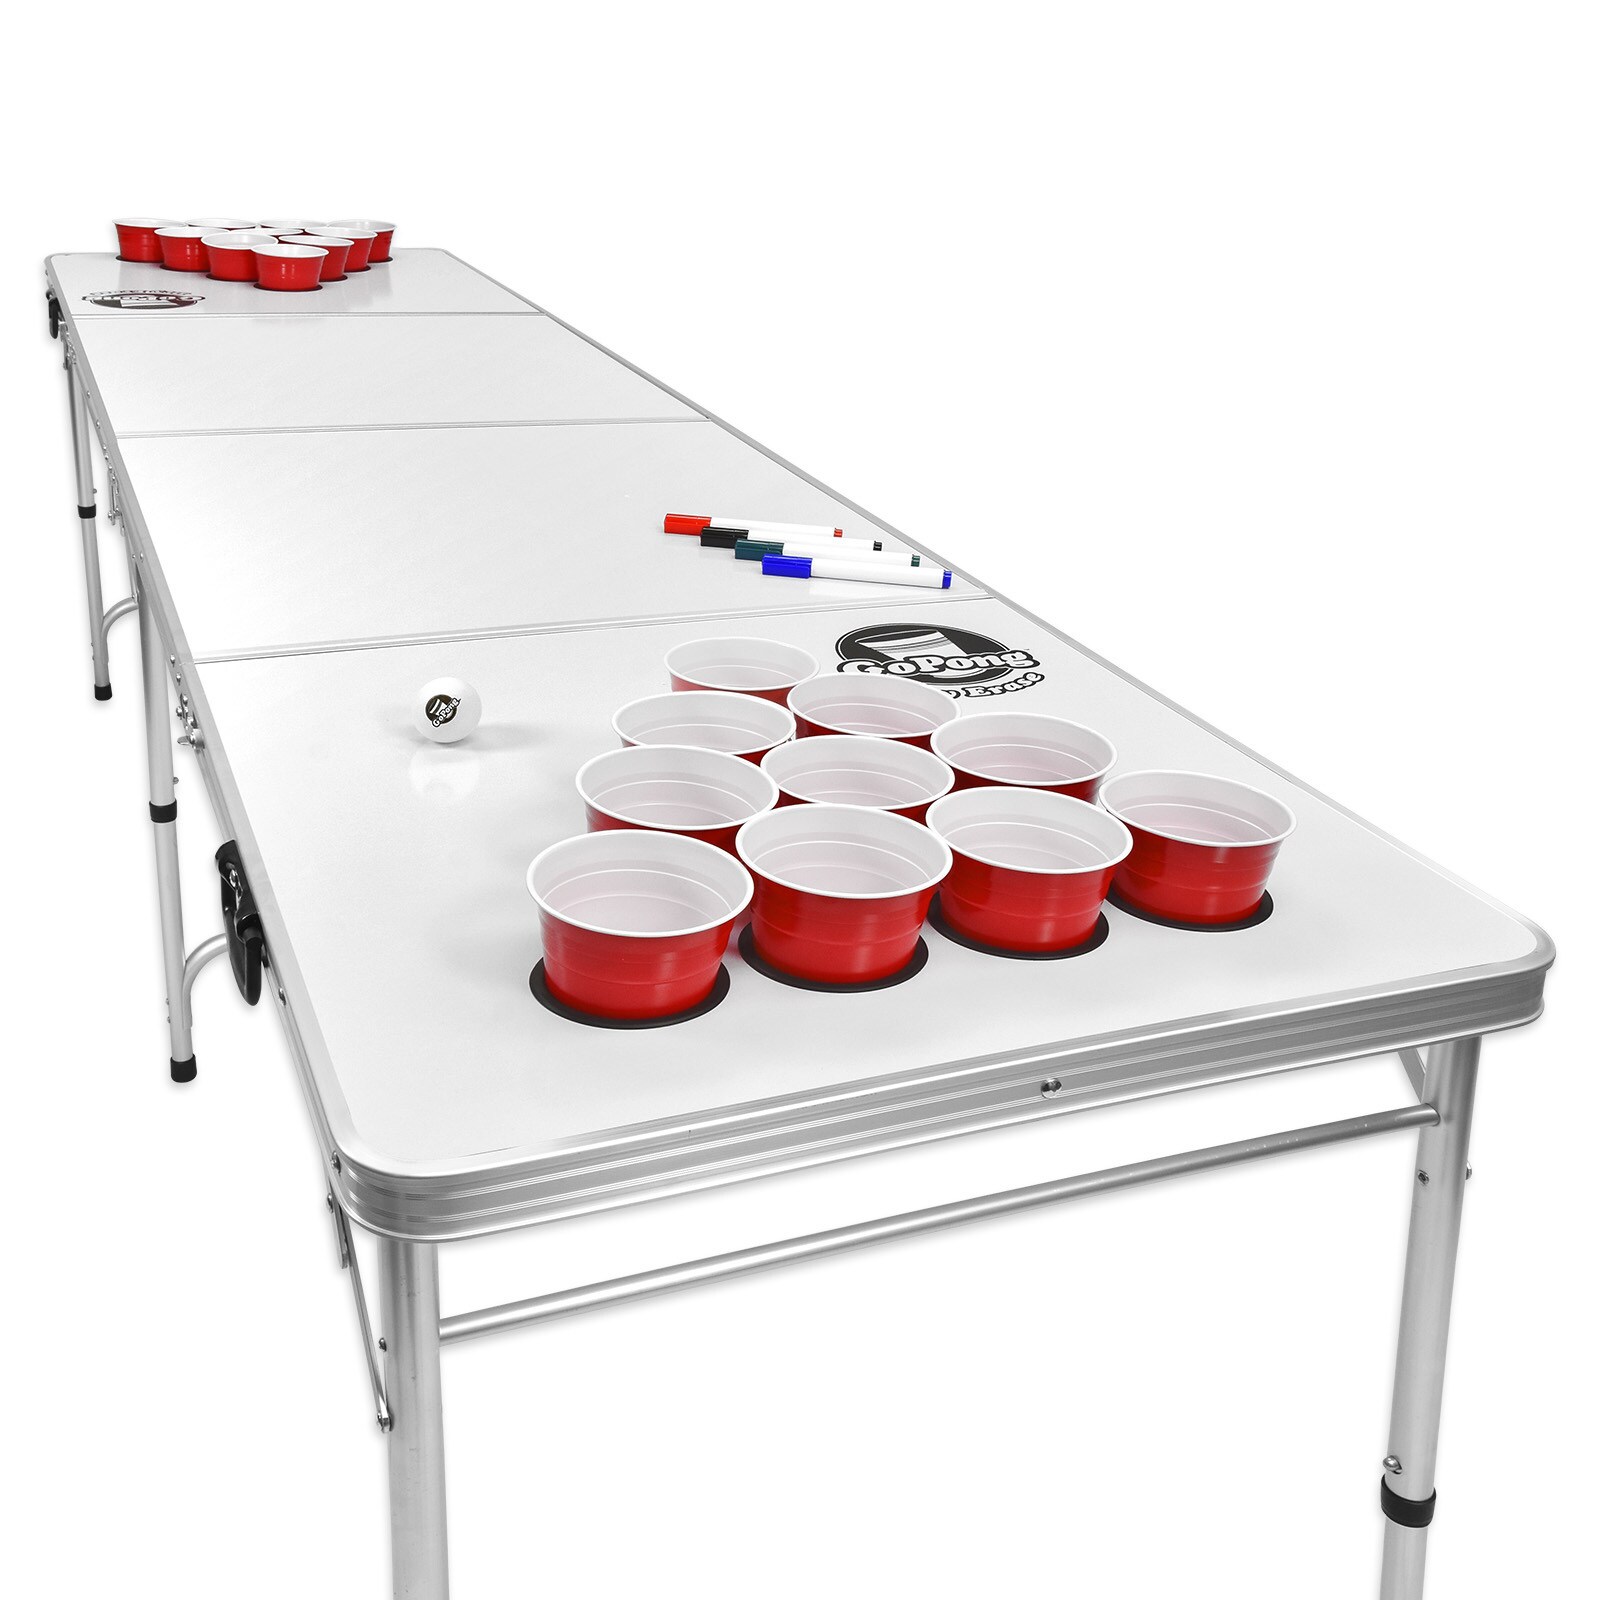 8' Collapsible Fold Beer Pong Game Table,LED Light Cup Holder-Black White  Girls